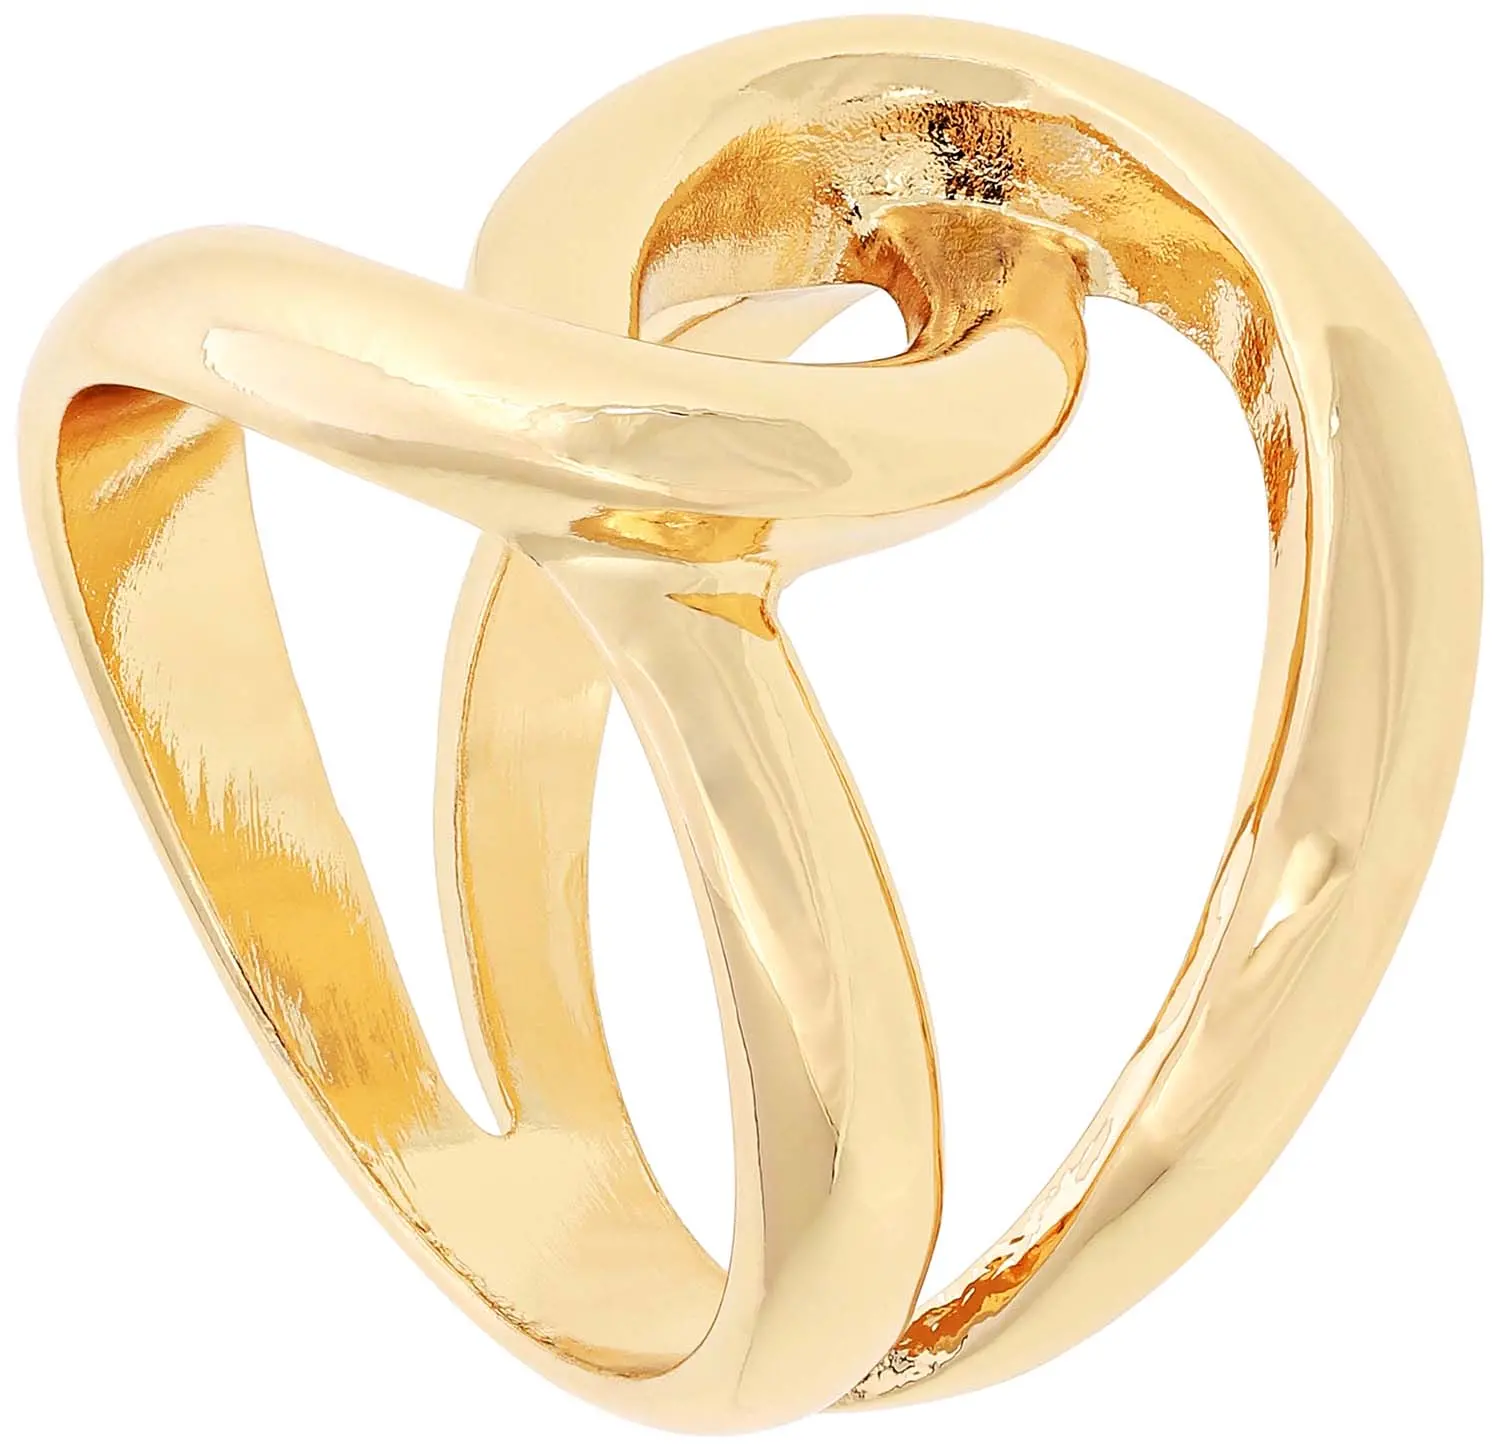 Ring - Entwined Gold